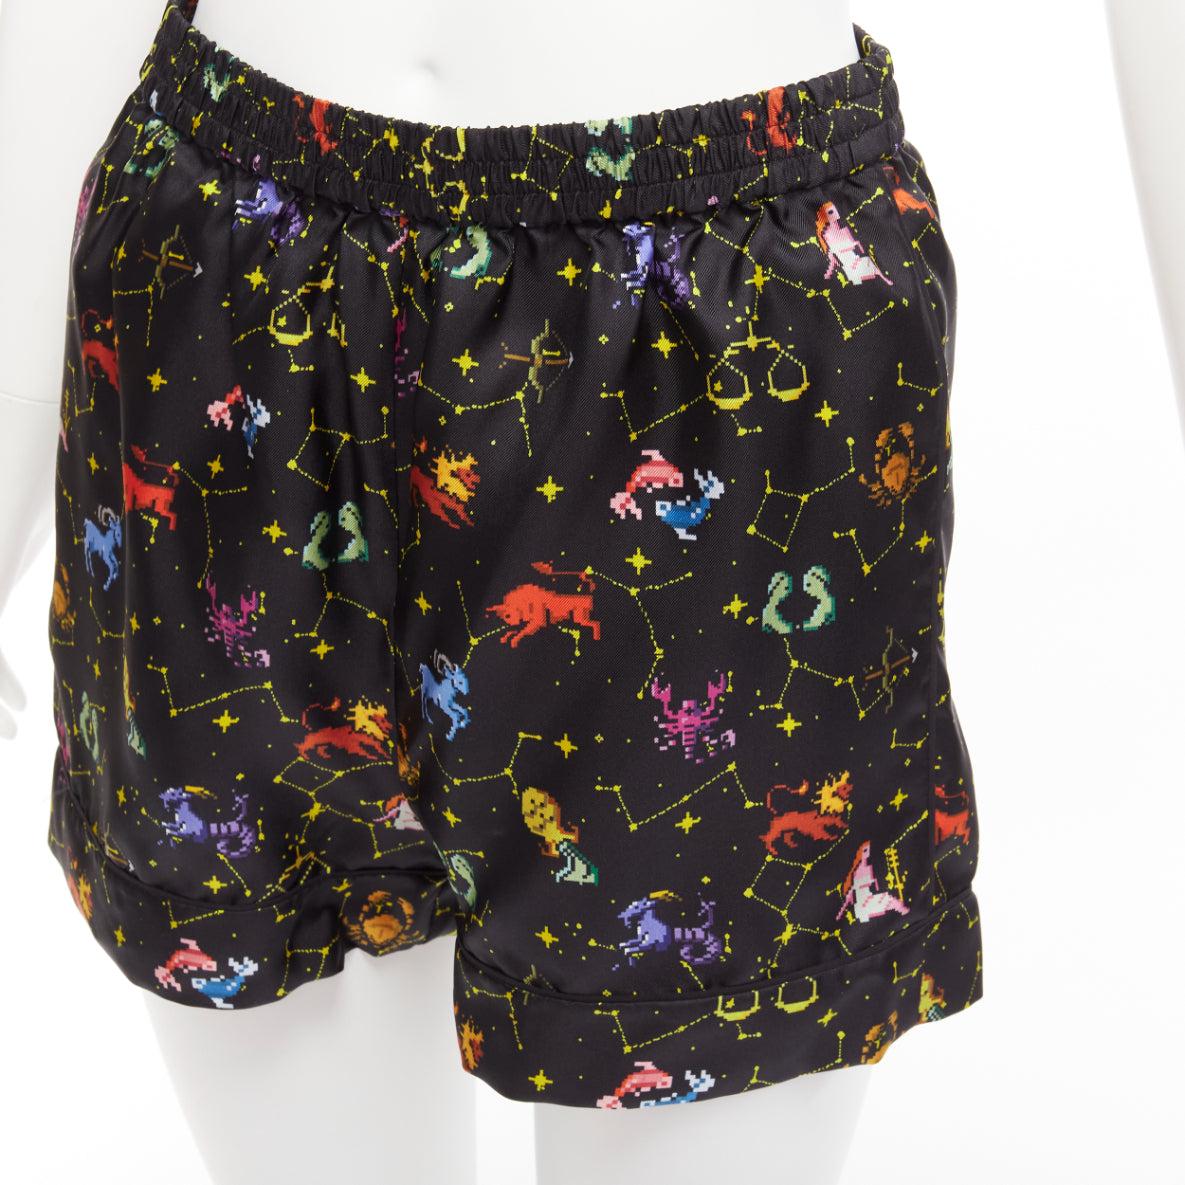 DIOR Lucky Dior 100% silk black colorful astrology cuffed boxer shorts FR32 XXS
Reference: AAWC/A00873
Brand: Dior
Designer: Maria Grazia Chiuri
Collection: Lucky Dior
Material: Silk
Color: Black, Multicolour
Pattern: Abstract
Closure: